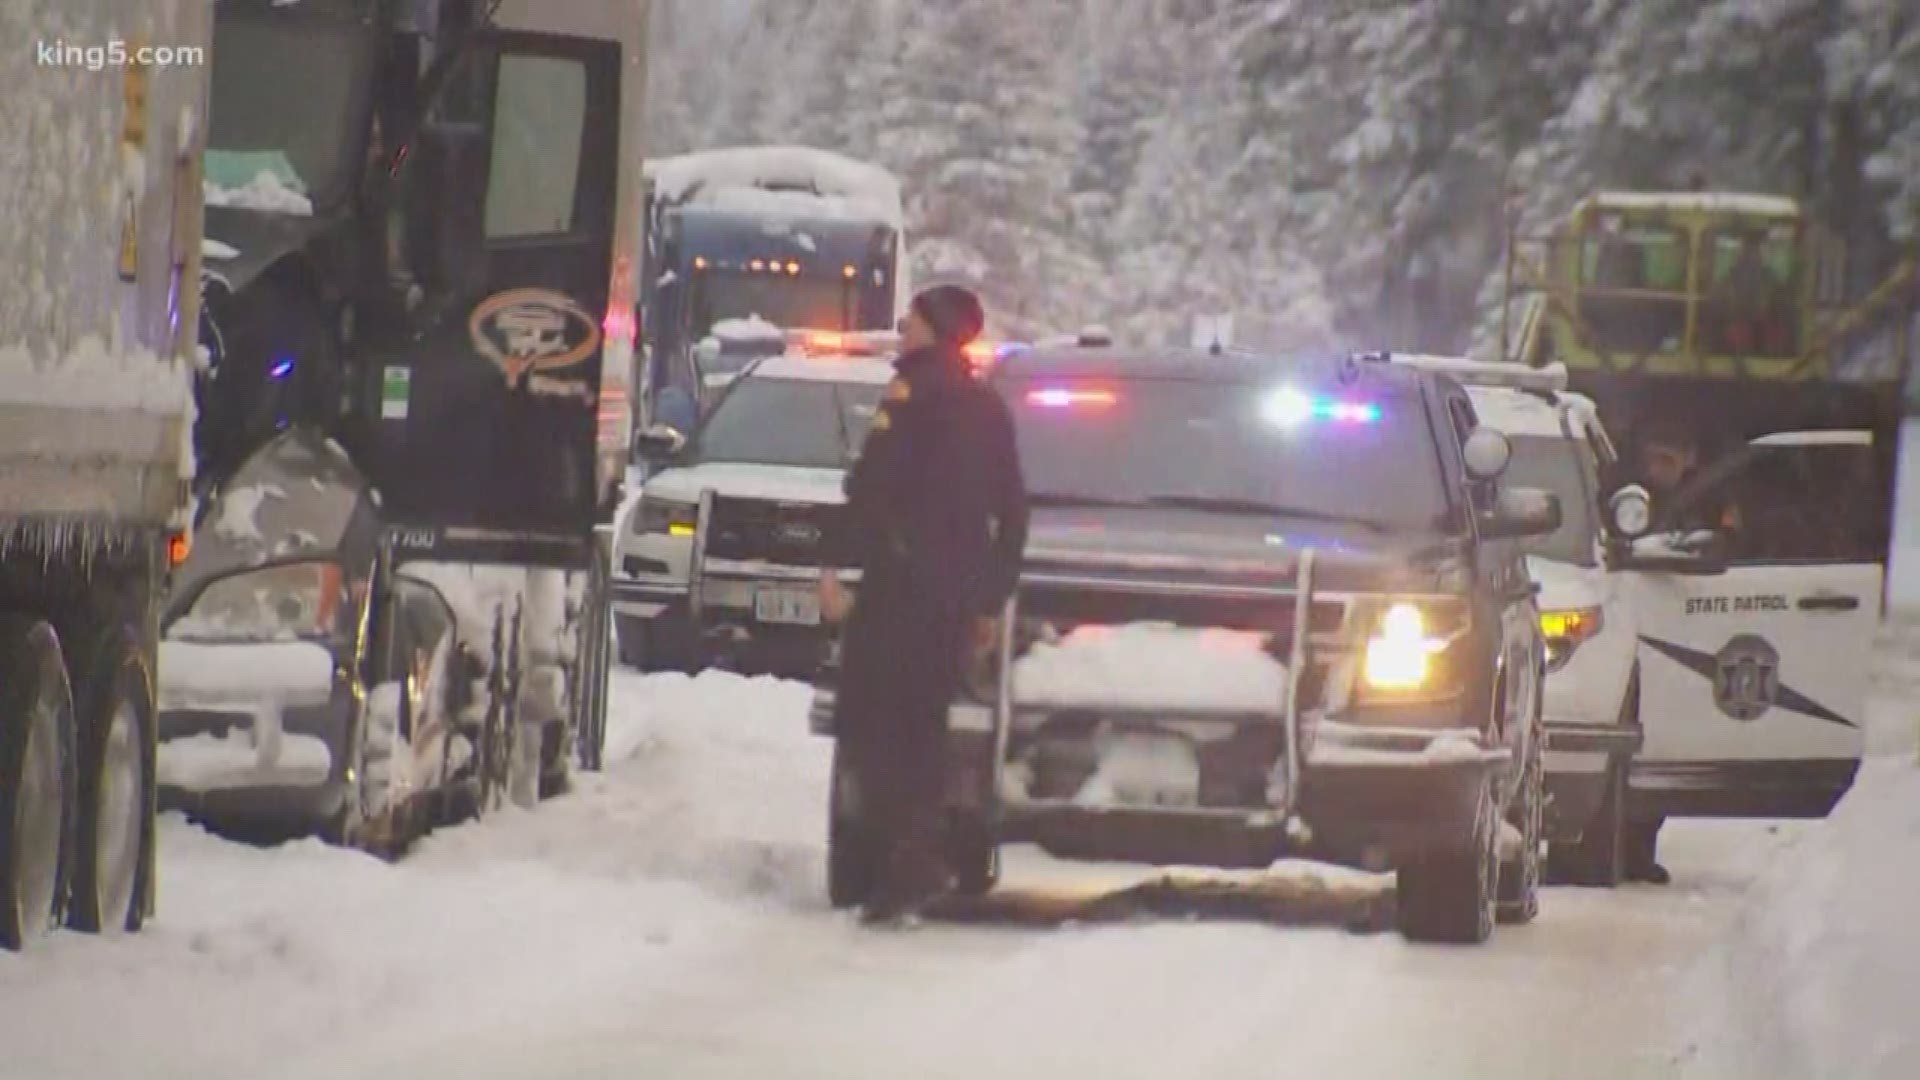 The Washington State Patrol and Washington State Department of Transportation are leading a caravan of semi trucks off Snoqualmie Pass while the pass is closed by deep snow and treacherous conditions. KING 5's Michael Crowe reports.